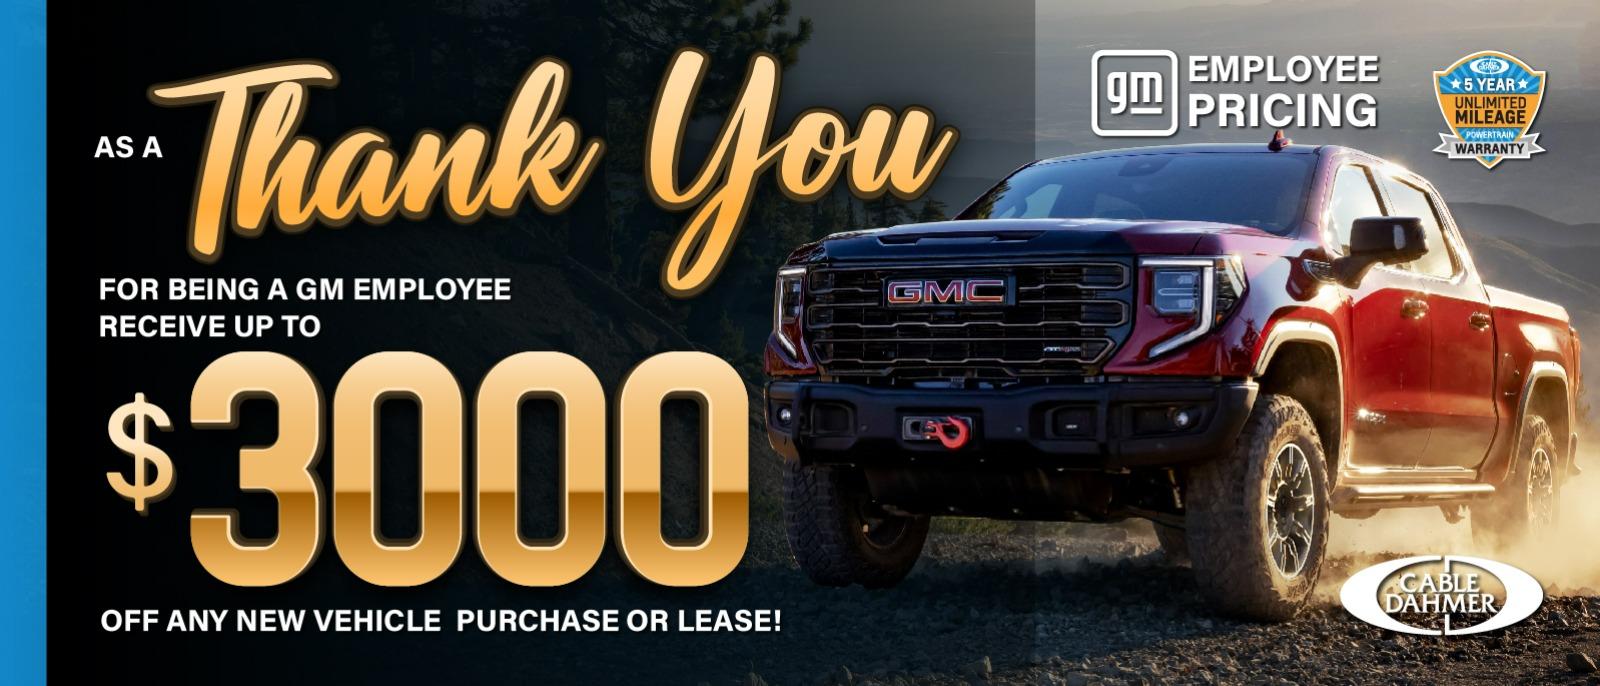 As a thank you for being a GM employee receive
up to #3000 off
any new vehicle purchase or lease